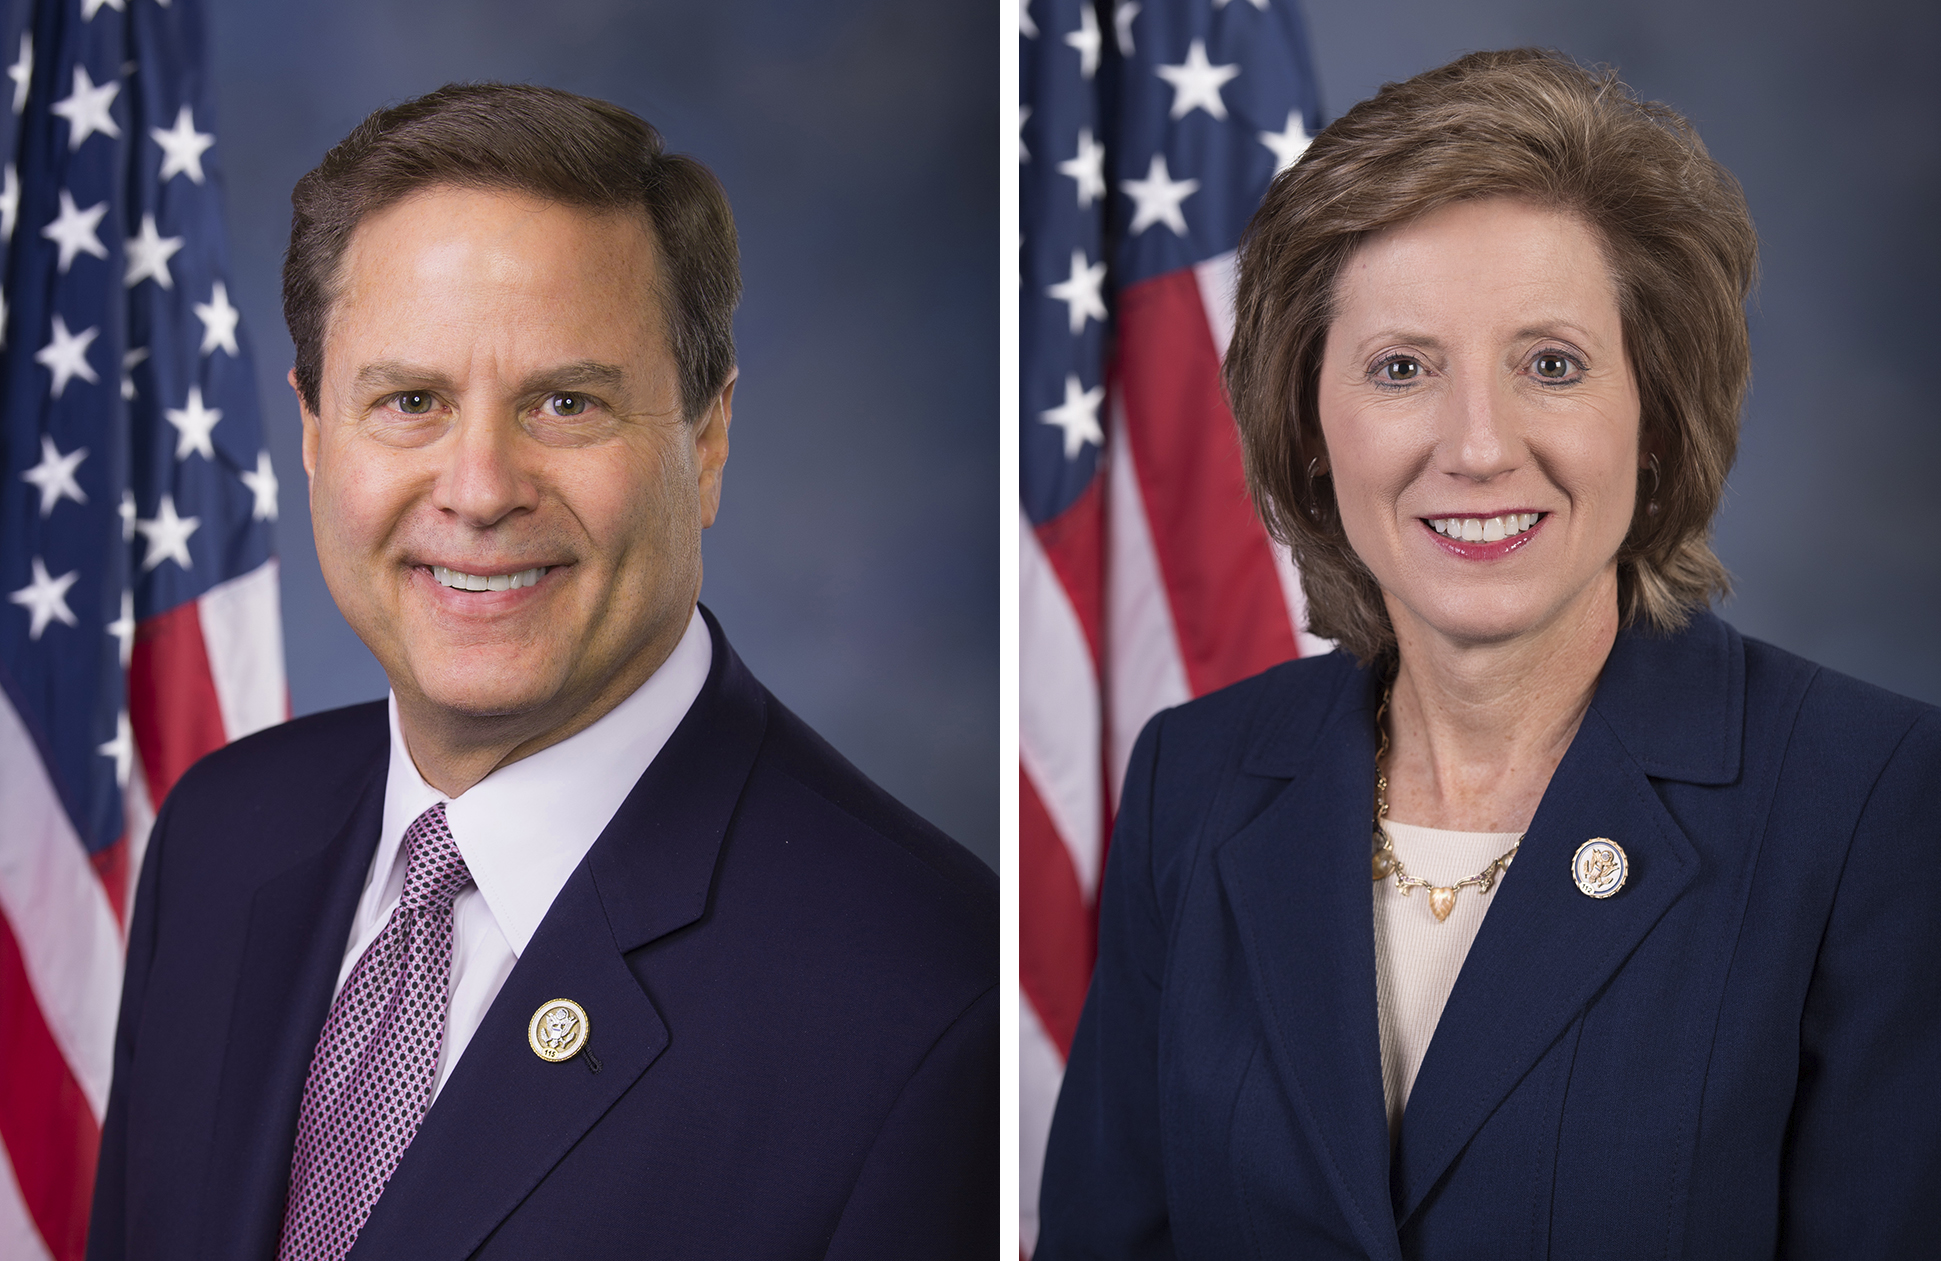 Who’s Who in Defense: HASC’s Tactical Air and Land Forces Subcommittee – Donald Norcross, Chairman; Vicky Hartzler, Ranking Member